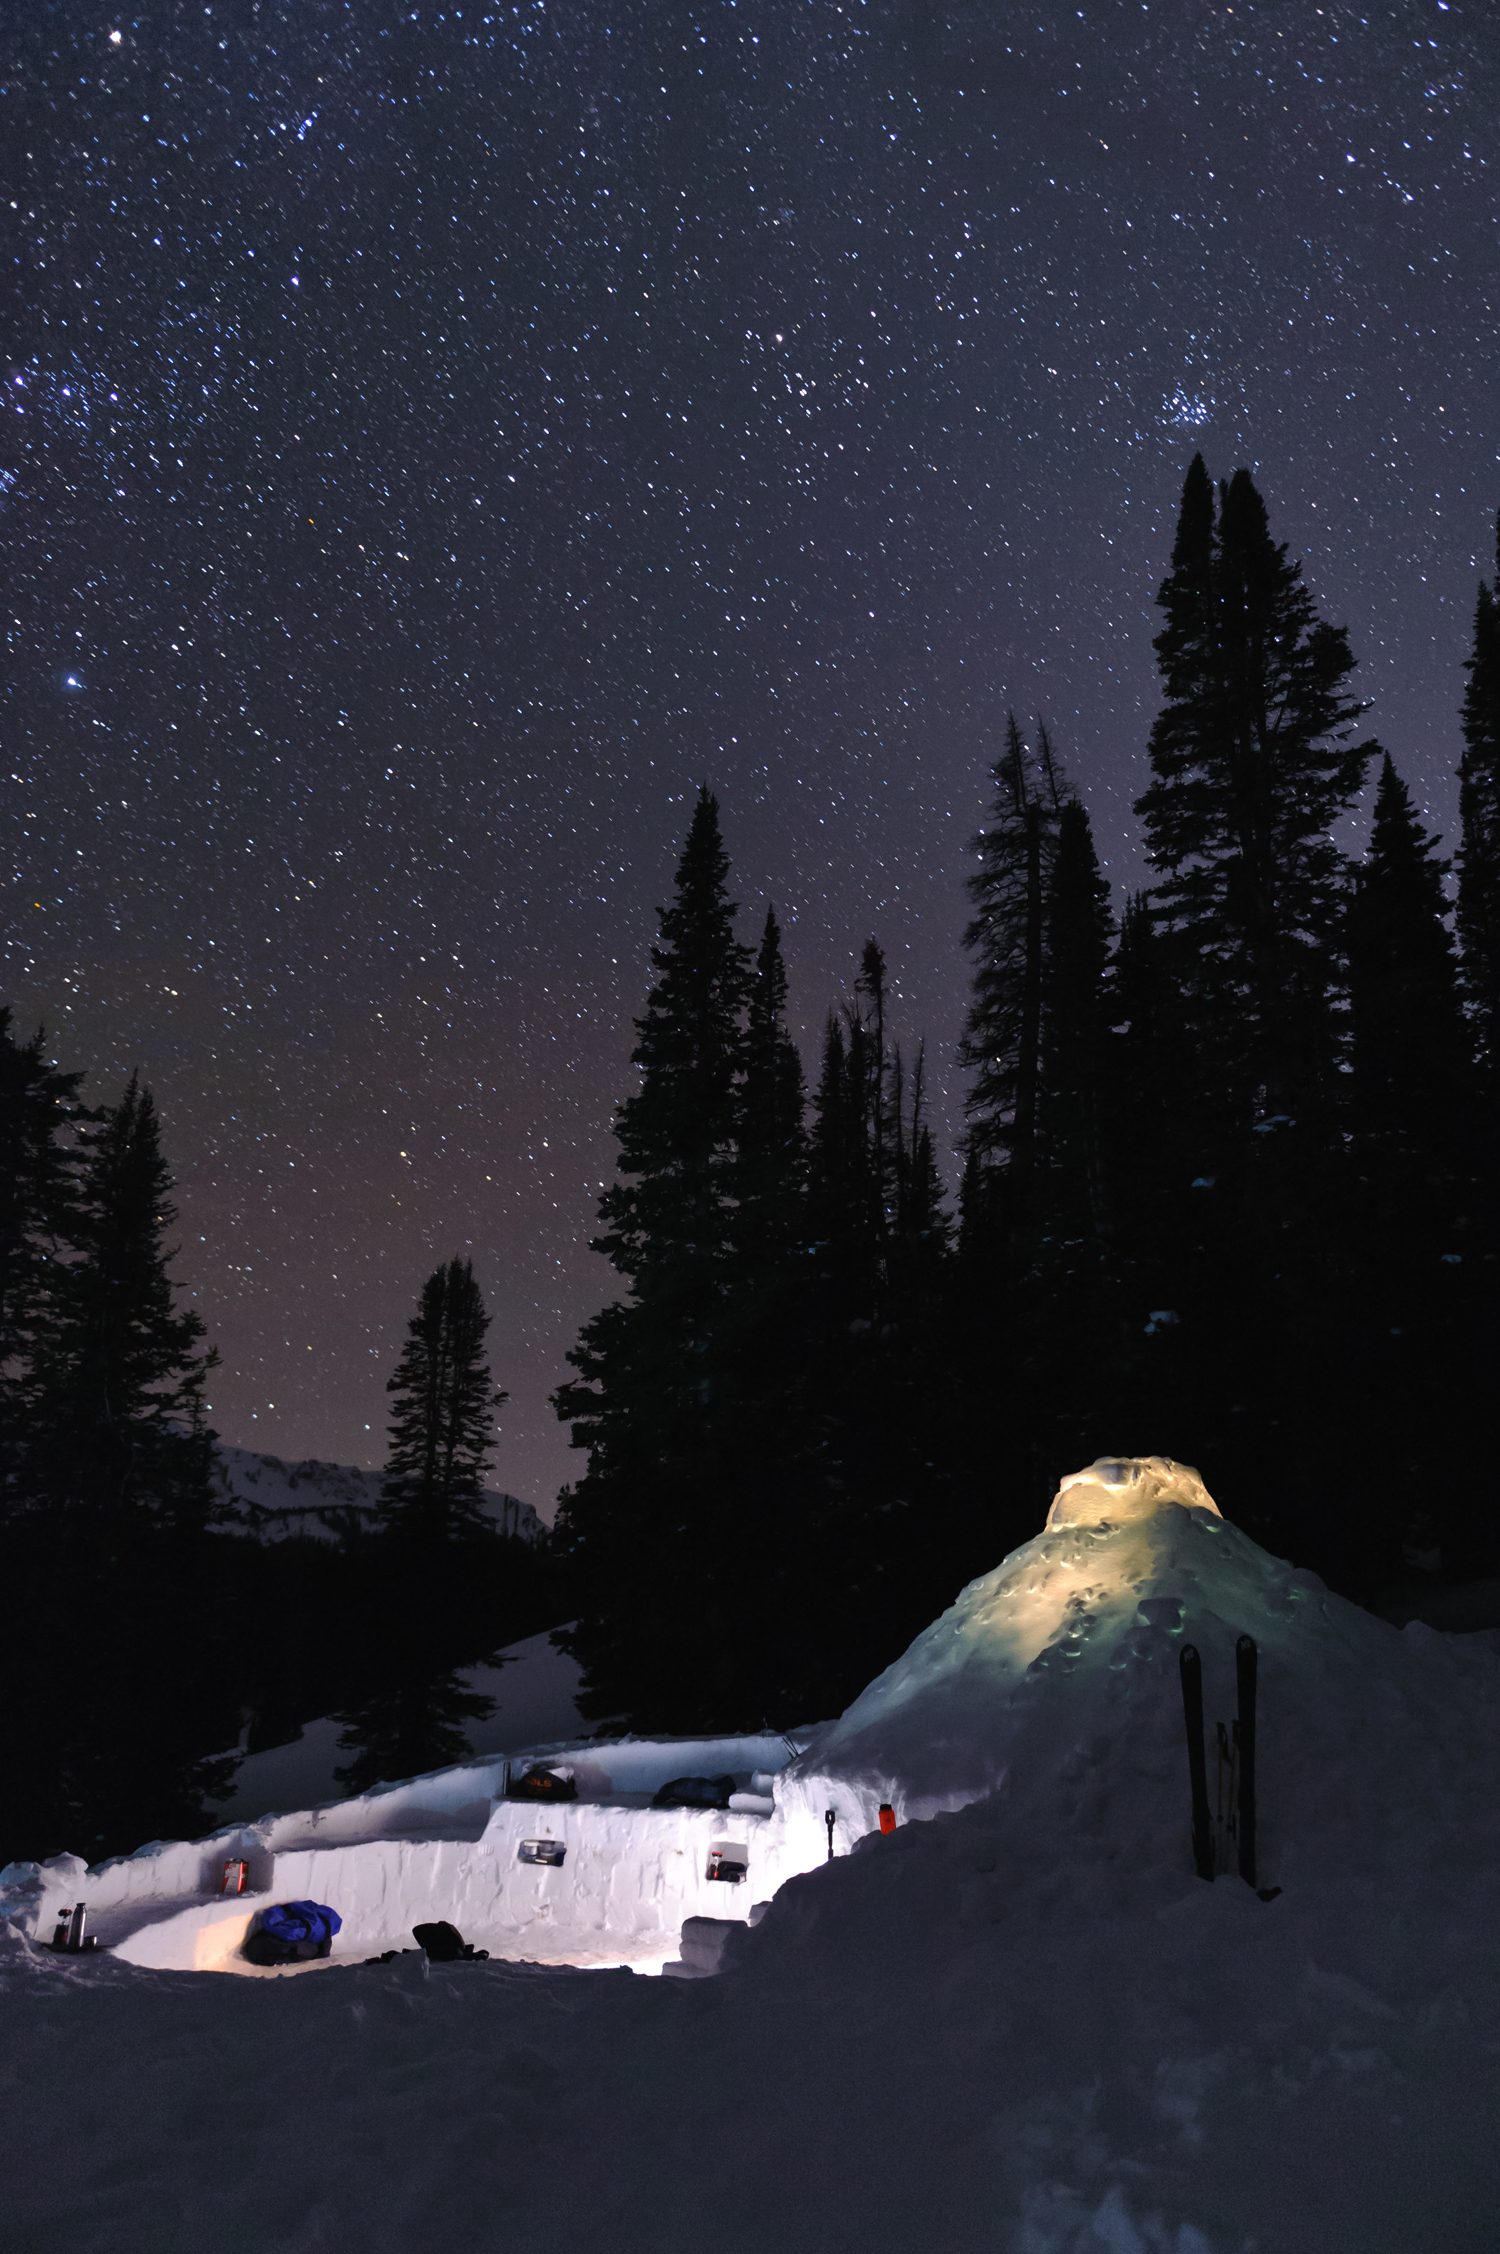 Real-world skills from NOLS Wyoming winter backcountry adventure include learning to build snow shelters and sleeping in them under the stars (photo by Fredrik Norrsell/NOLS).